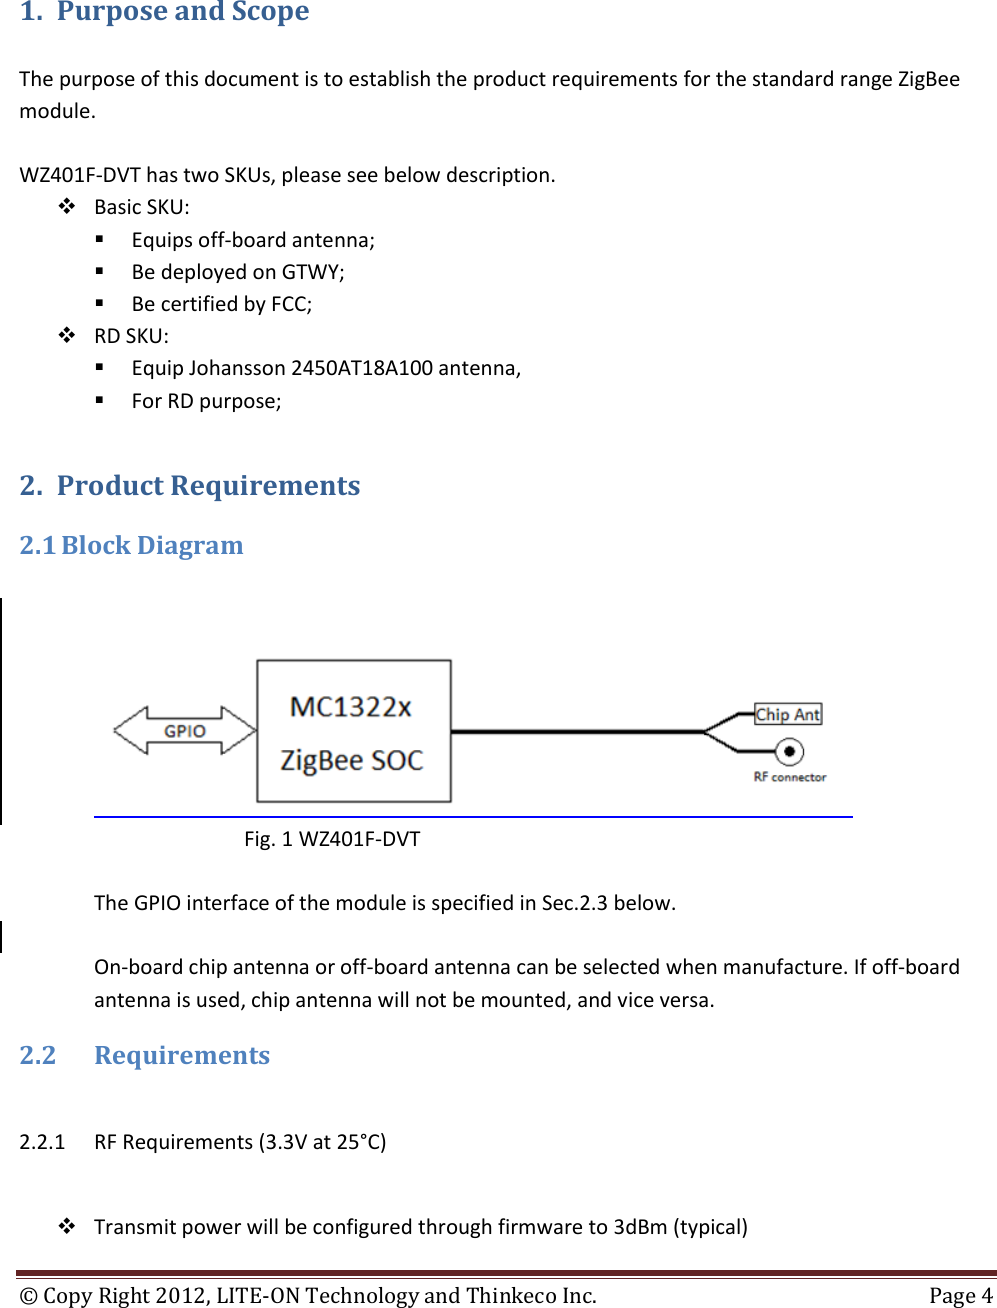 ©  Copy Right 2012, LITE-ON Technology and Thinkeco Inc.  Page 4   1. Purpose and Scope  The purpose of this document is to establish the product requirements for the standard range ZigBee module.   WZ401F-DVT has two SKUs, please see below description.  Basic SKU:   Equips off-board antenna;  Be deployed on GTWY;   Be certified by FCC;  RD SKU:   Equip Johansson 2450AT18A100 antenna,   For RD purpose; 2. Product Requirements 2.1 Block Diagram                      Fig. 1 WZ401F-DVT  The GPIO interface of the module is specified in Sec.2.3 below.   On-board chip antenna or off-board antenna can be selected when manufacture. If off-board antenna is used, chip antenna will not be mounted, and vice versa.  2.2 Requirements  2.2.1 RF Requirements (3.3V at 25°C)   Transmit power will be configured through firmware to 3dBm (typical) 